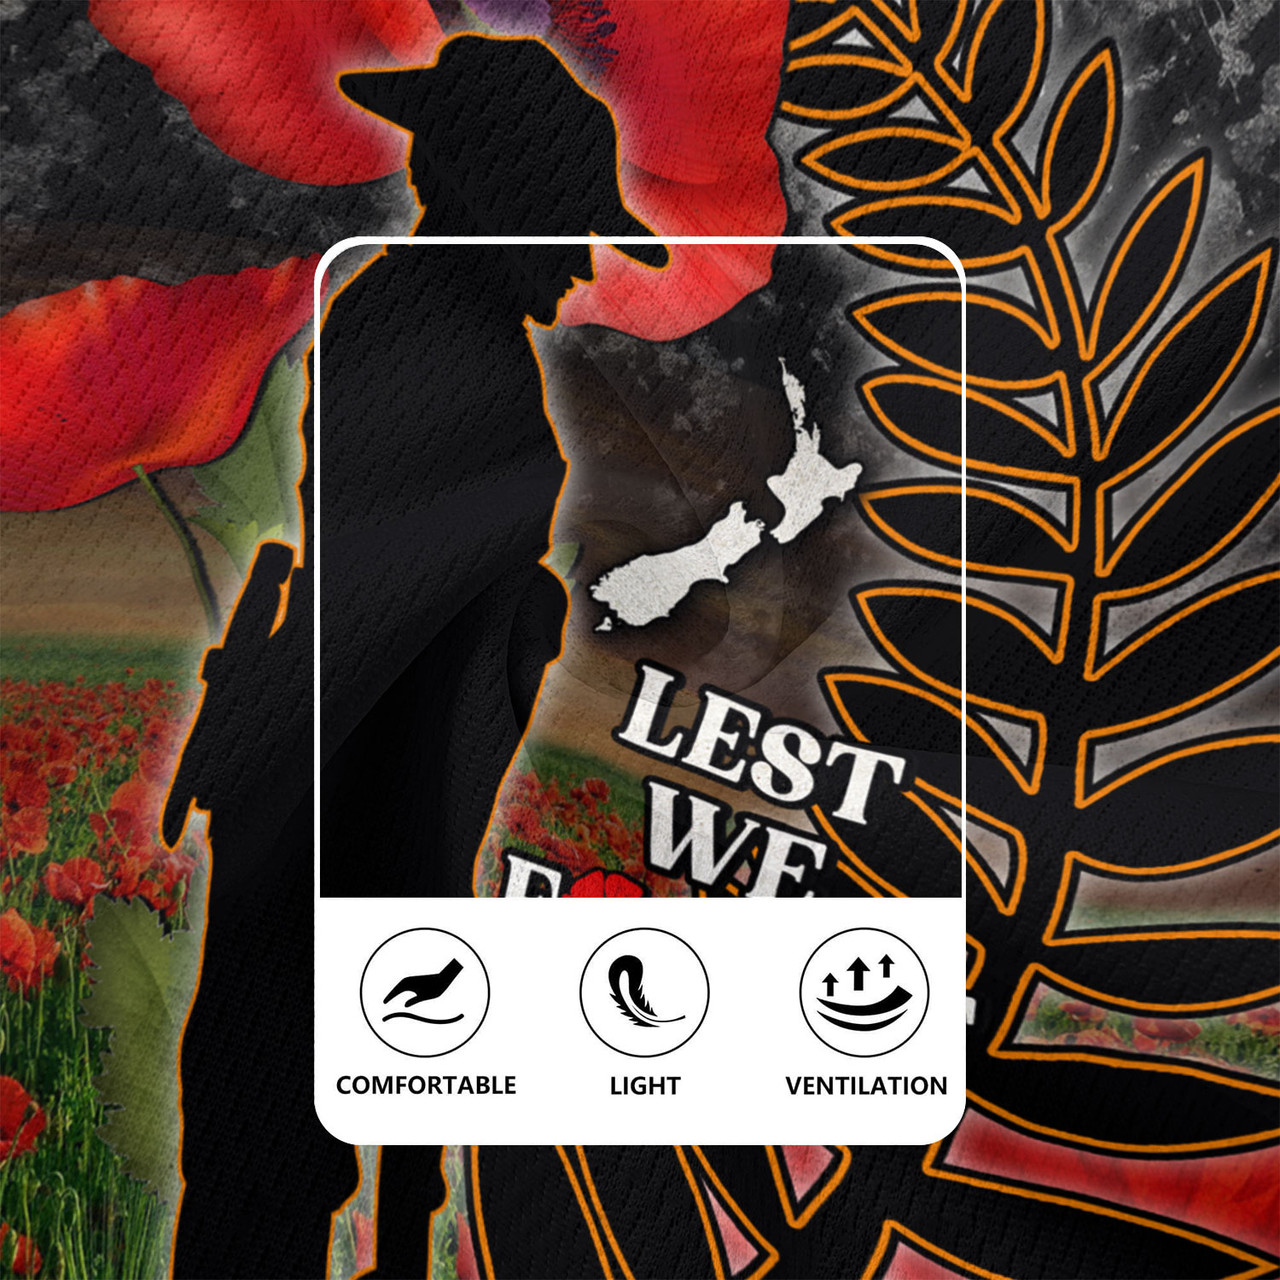 New Zealand Rugby Jersey Custom Anzac Day Lest We Forget Silver Fern